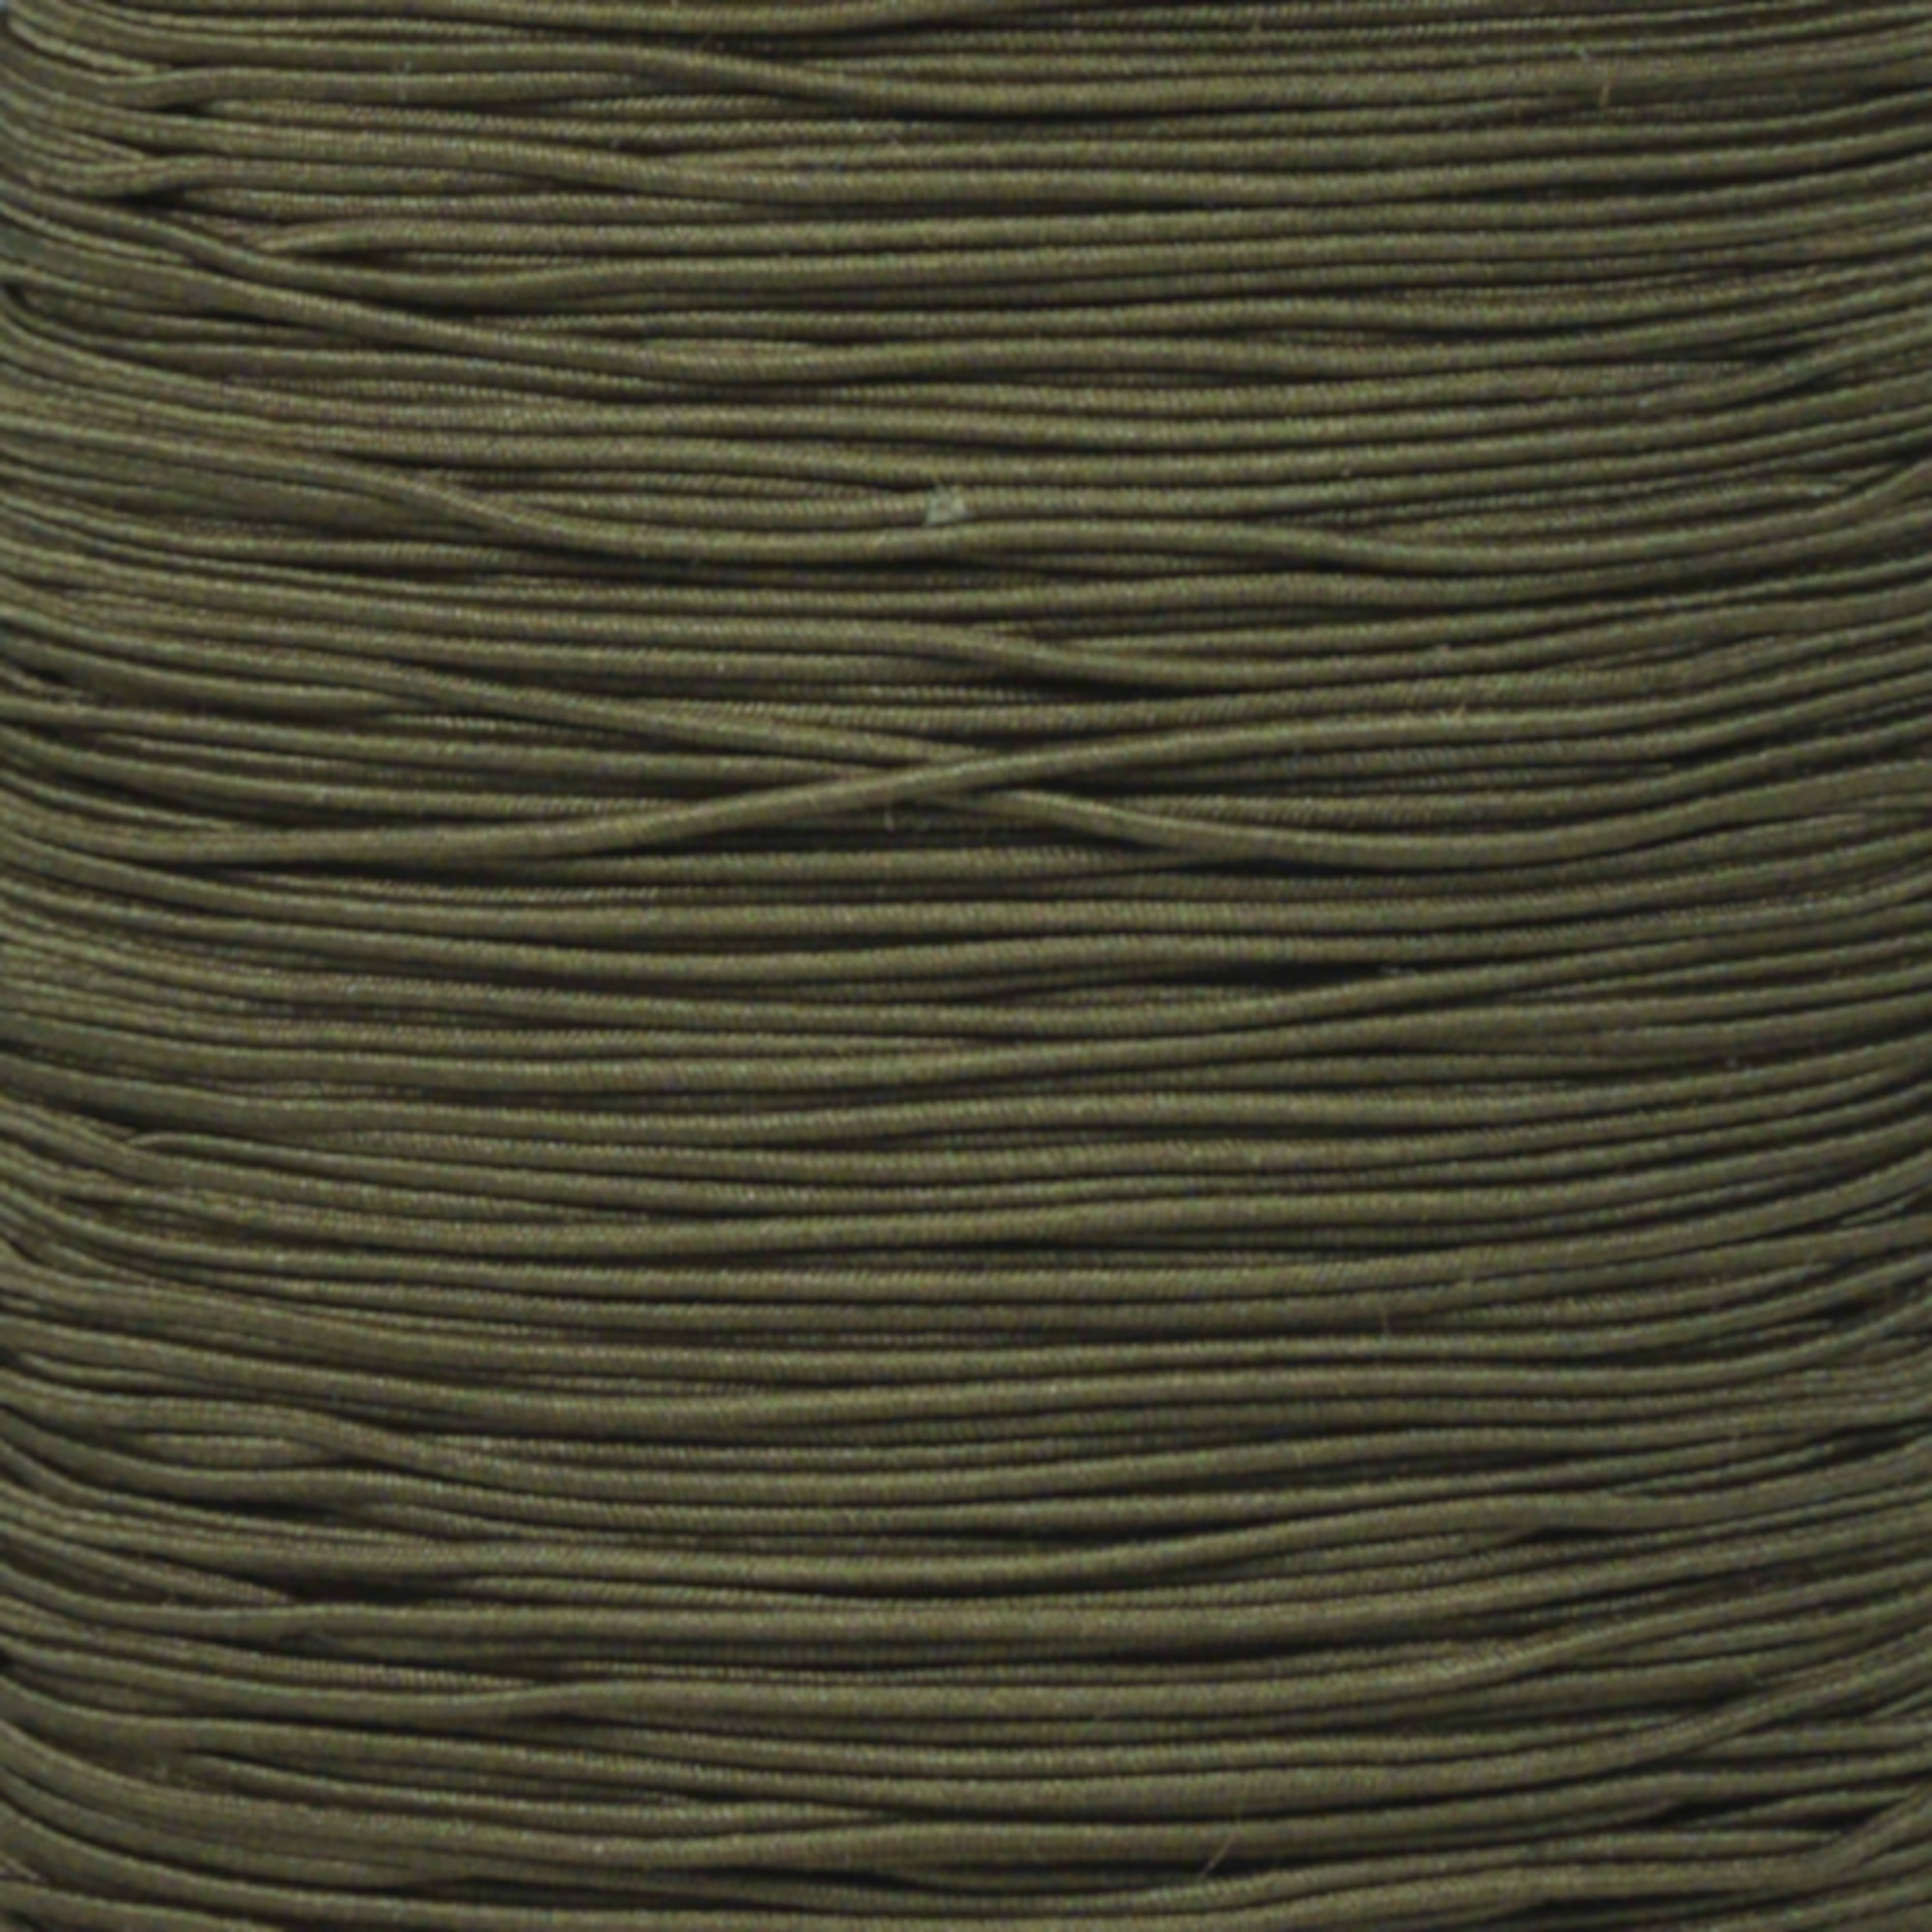 Paracord Planet 1/4 Inch Elastic Cord Crafting Stretch String 25 Feet, Olive Drab Made in USA